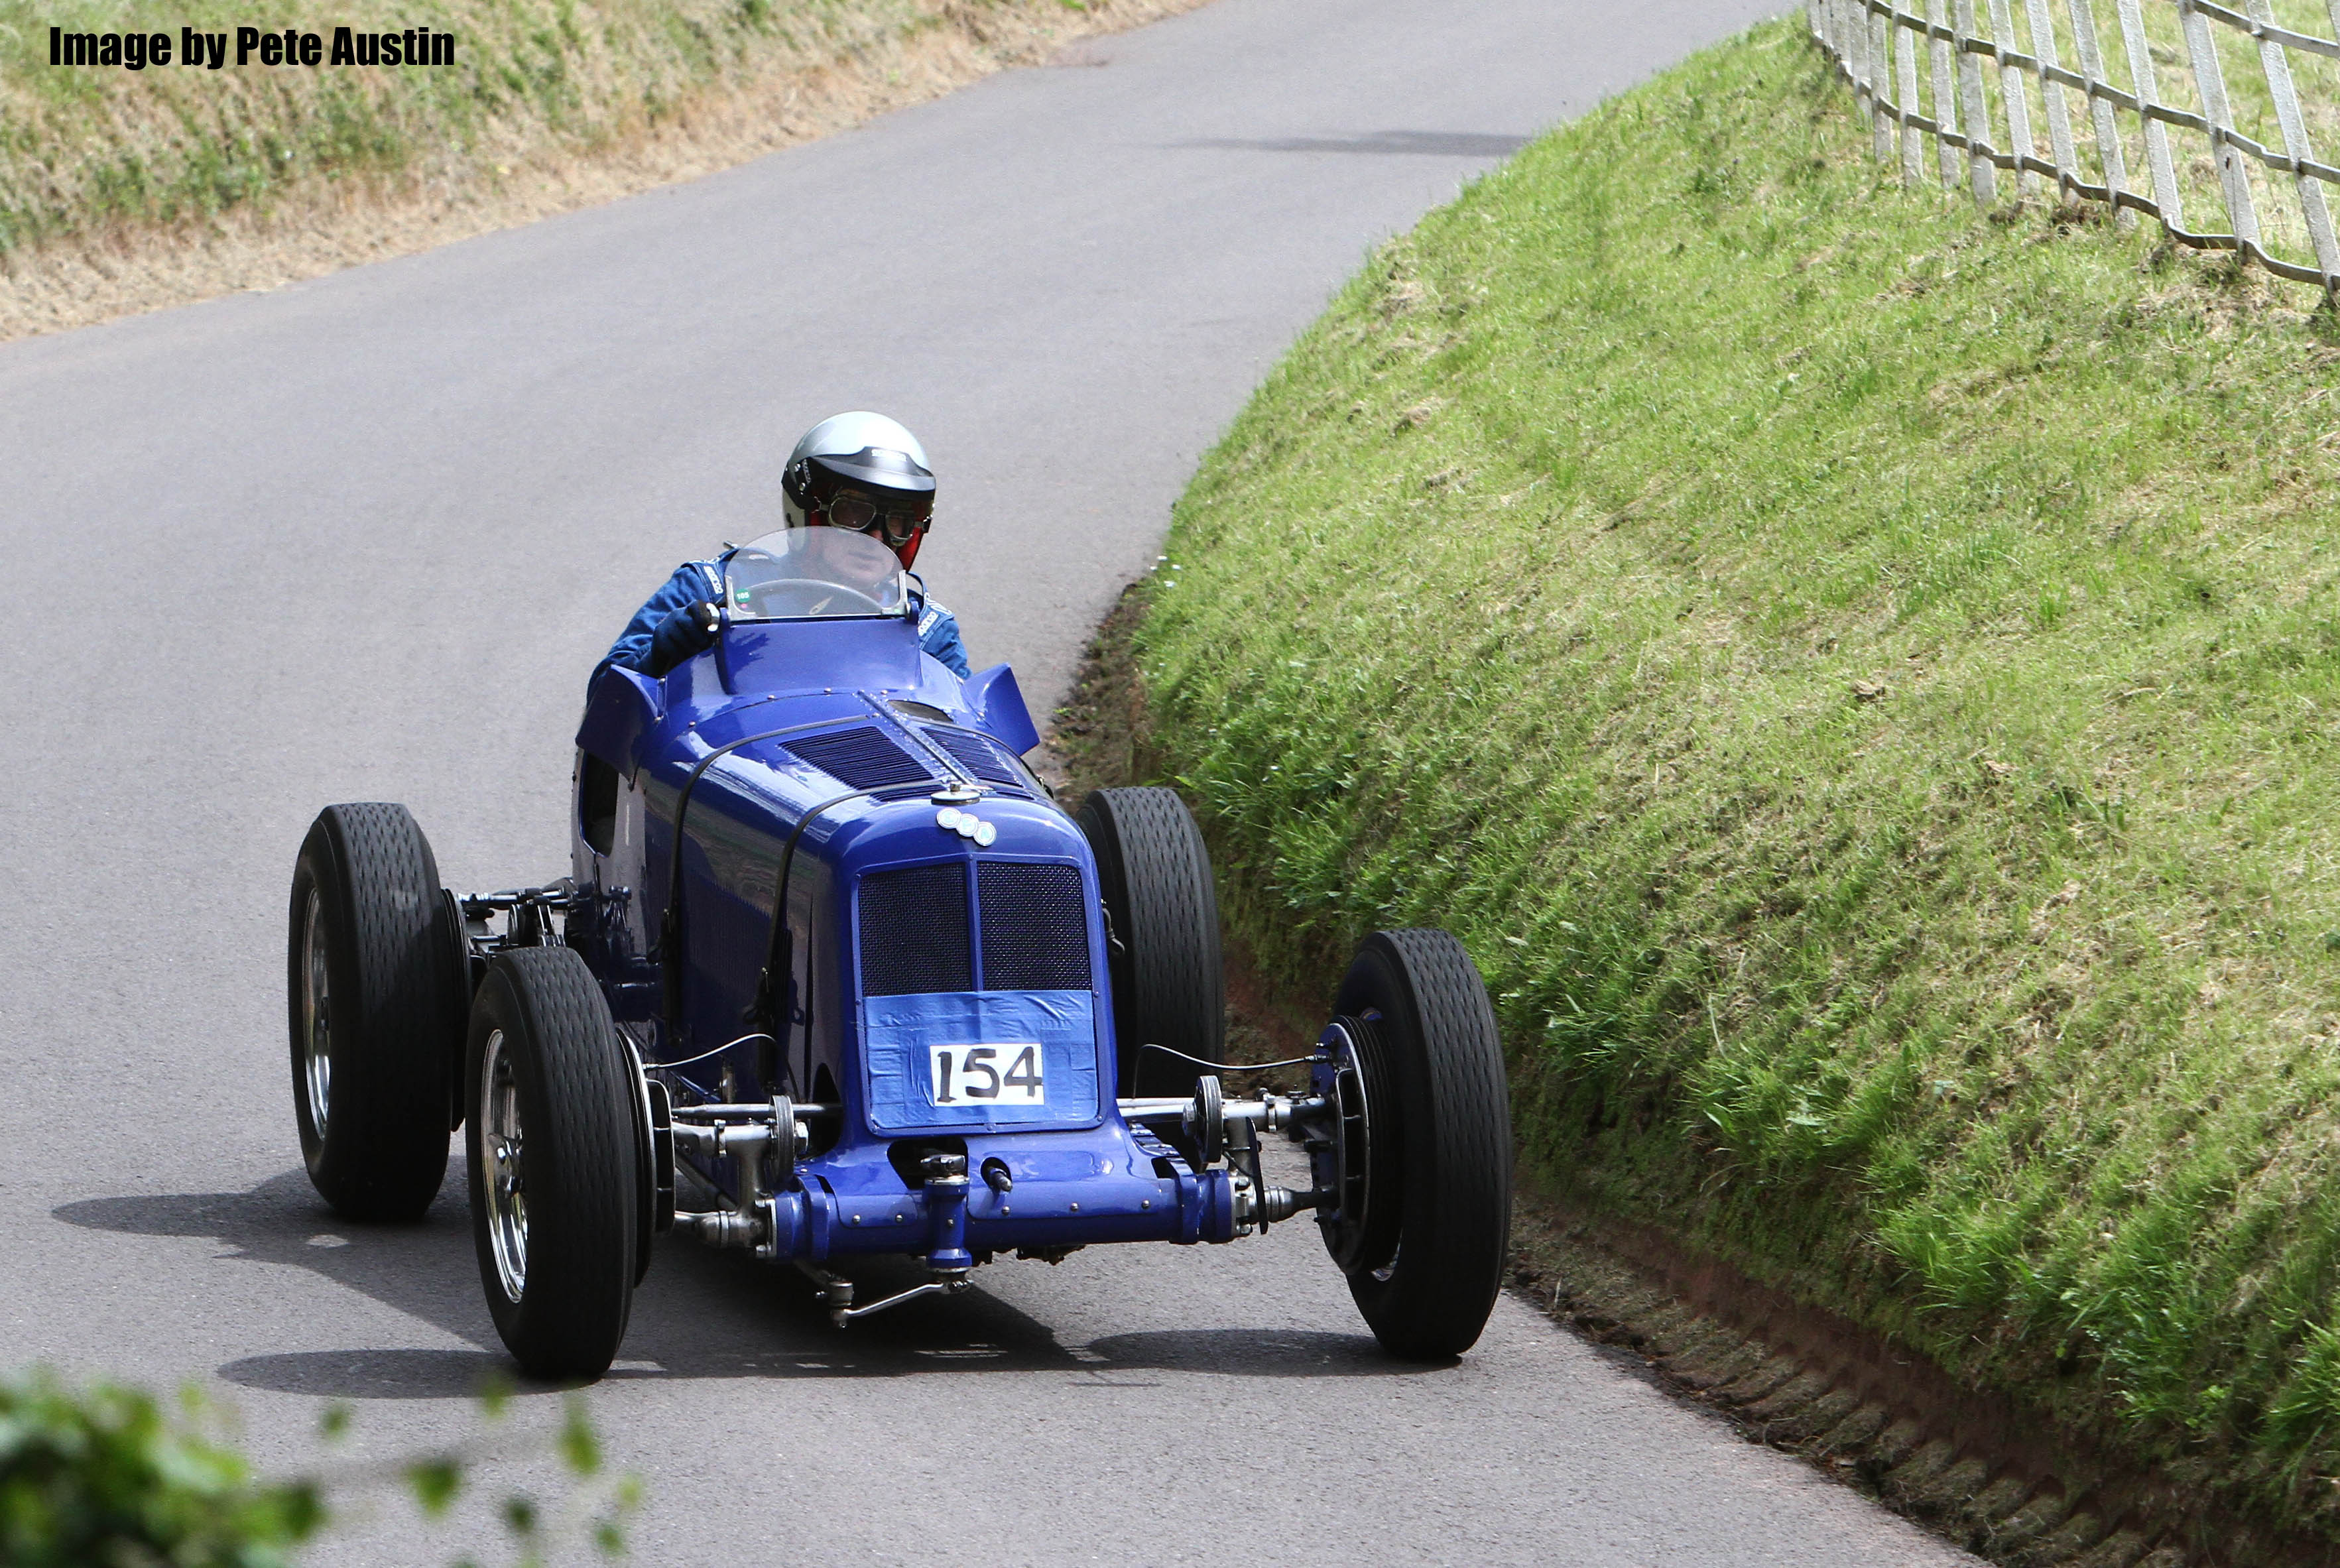 The VSCC head to Shelsley Walsh for the MAC Vintage Hill Climb this weekend cover